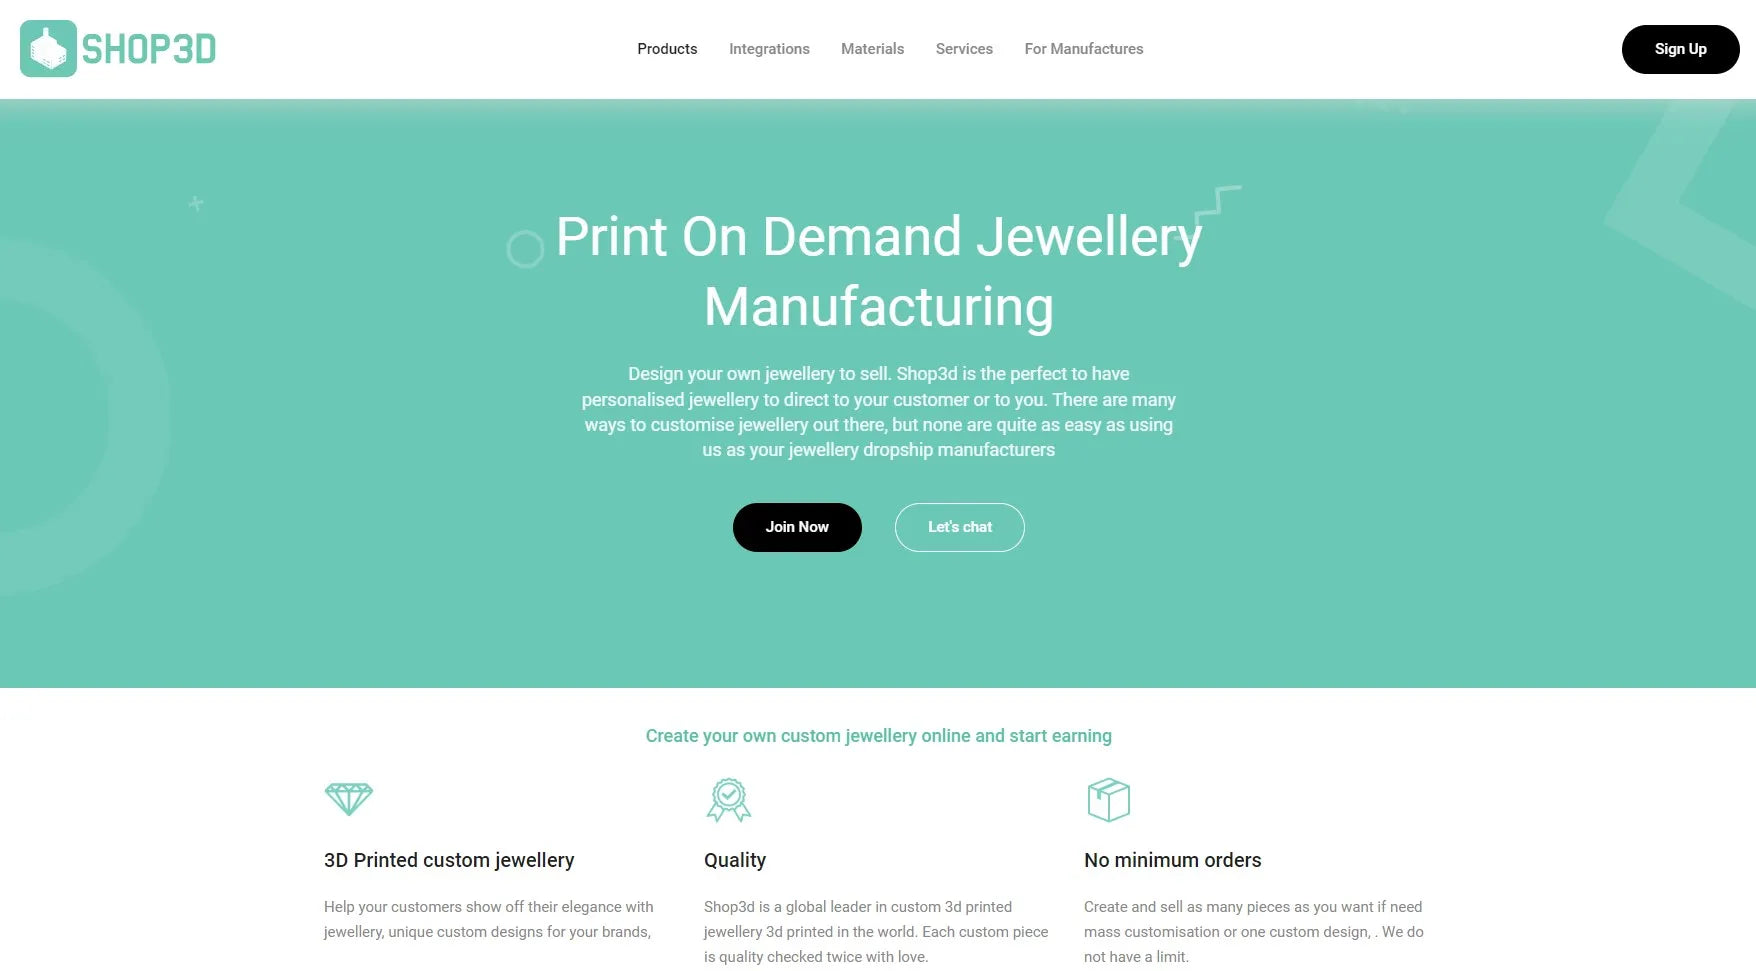 Shop3D’s print on demand jewelry page